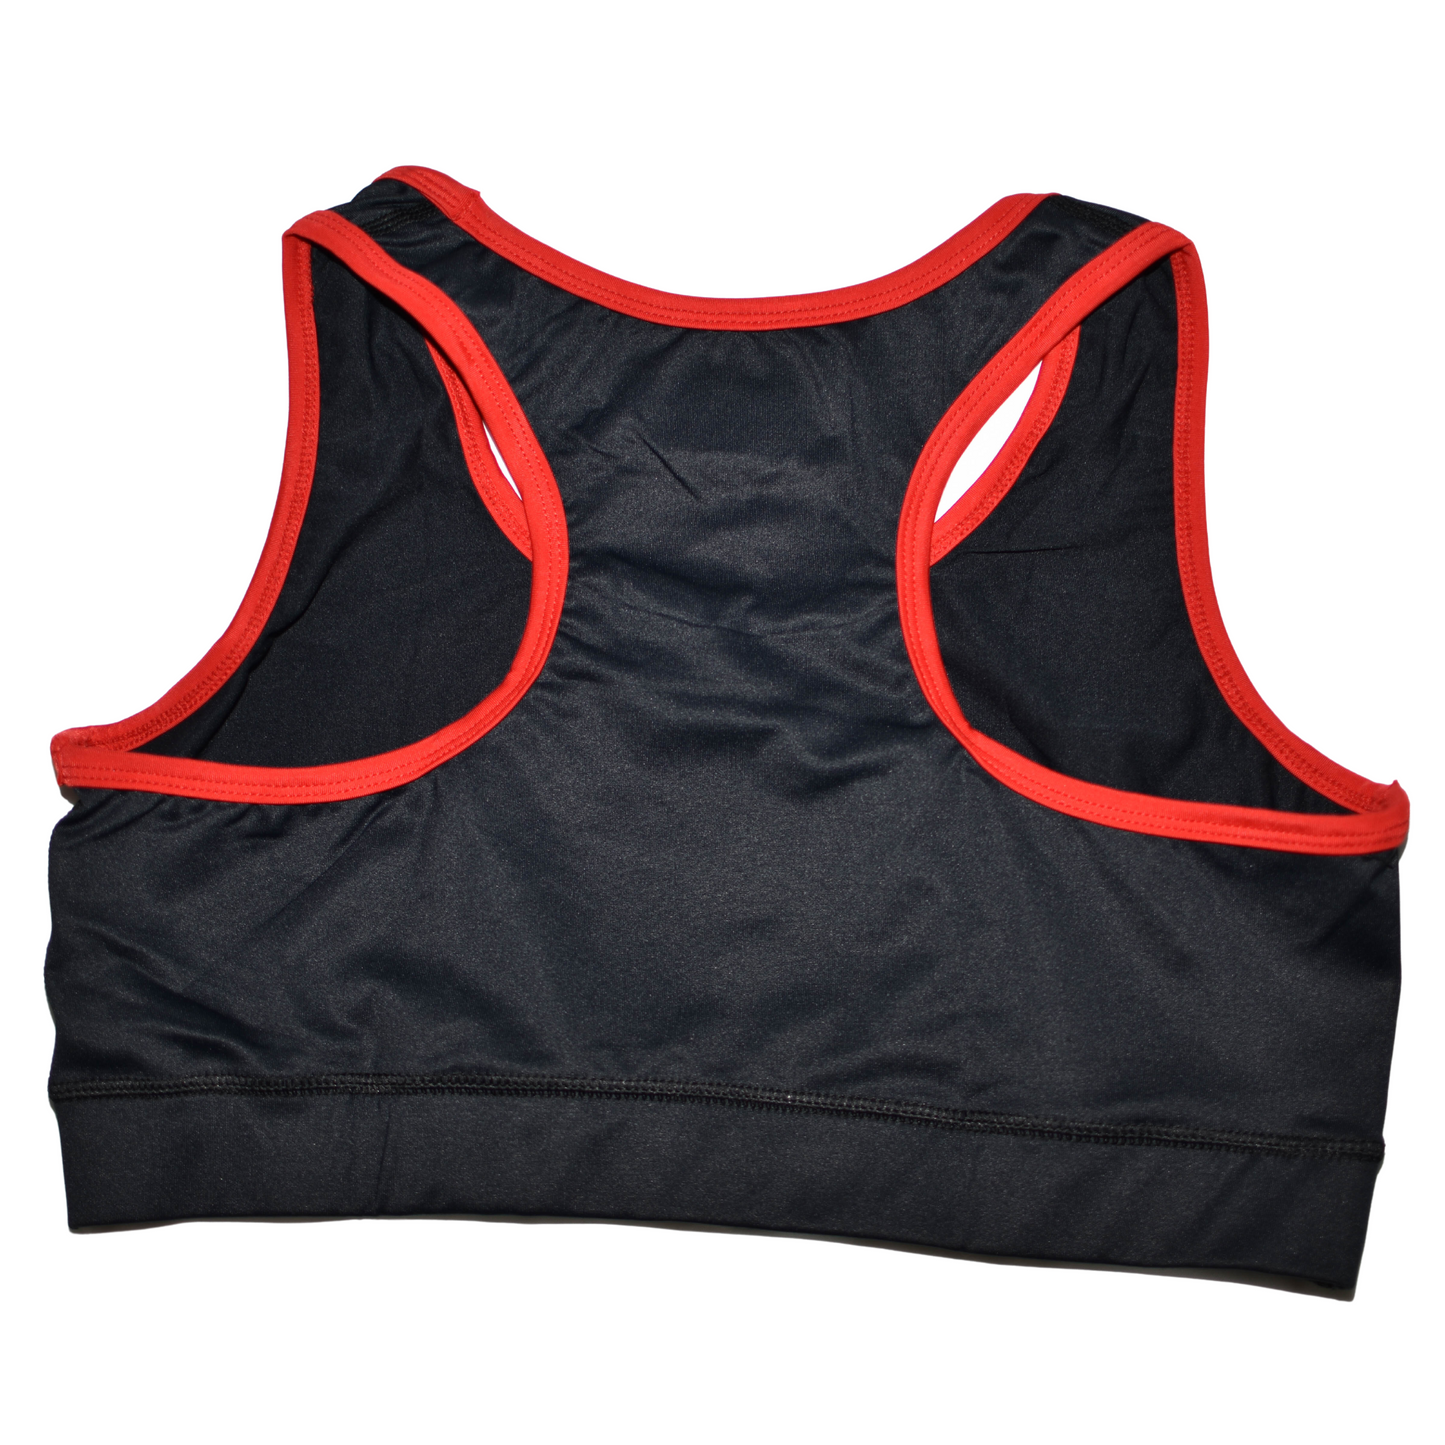 BBA Black and red Sports Bra